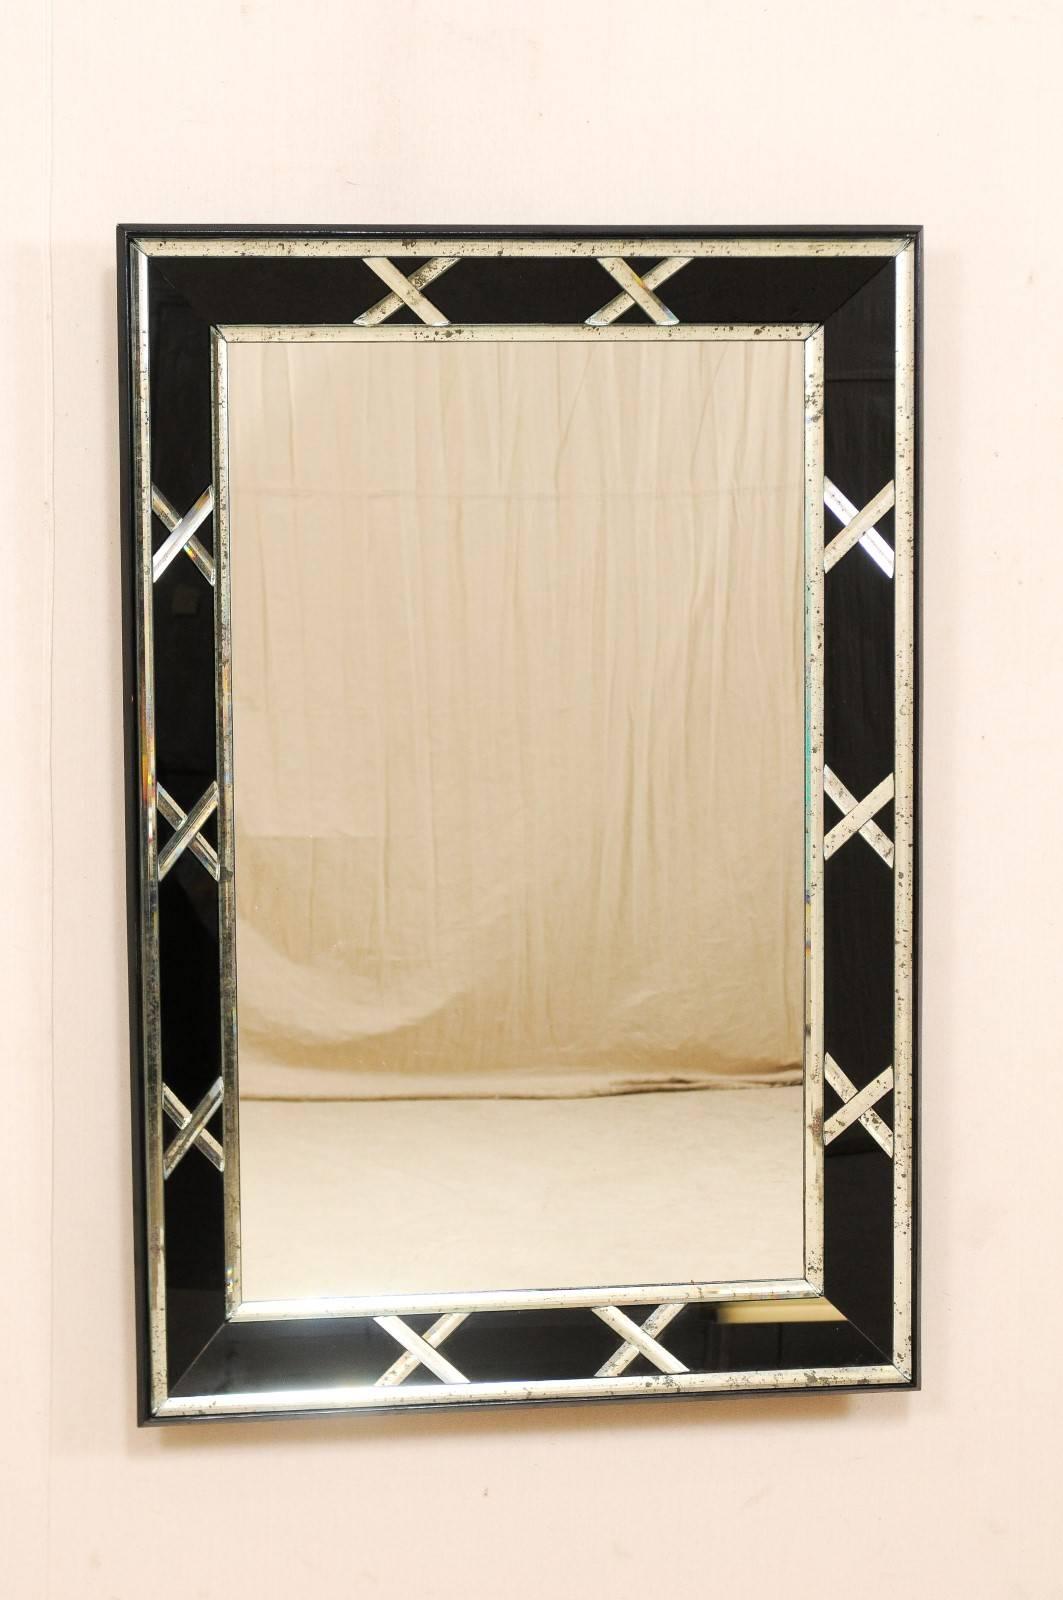 A pair of vintage American large-sized mirrors with accentuated black X-designed border. These American rectangular shaped mirrors feature a clear center glass center with black glass surround which is accented in an x-shape motif and framed along